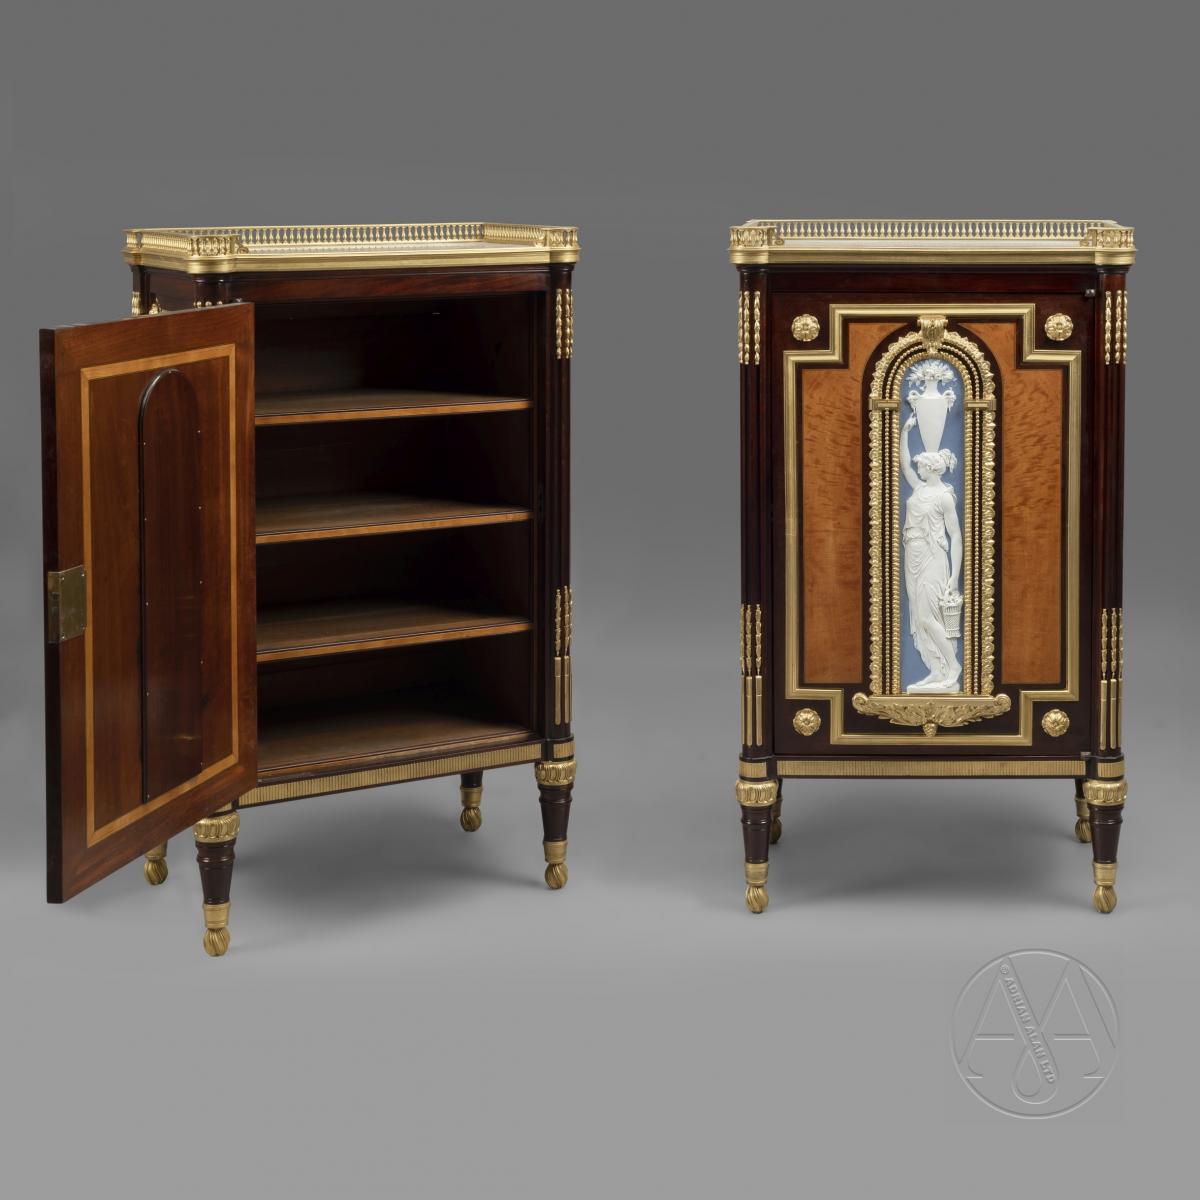 A Rare and Highly Important Pair of Neoclassical Style Gilt-Bronze and  Biscuit Porcelain Mounted Mahogany Side Cabinets by Jules Piret